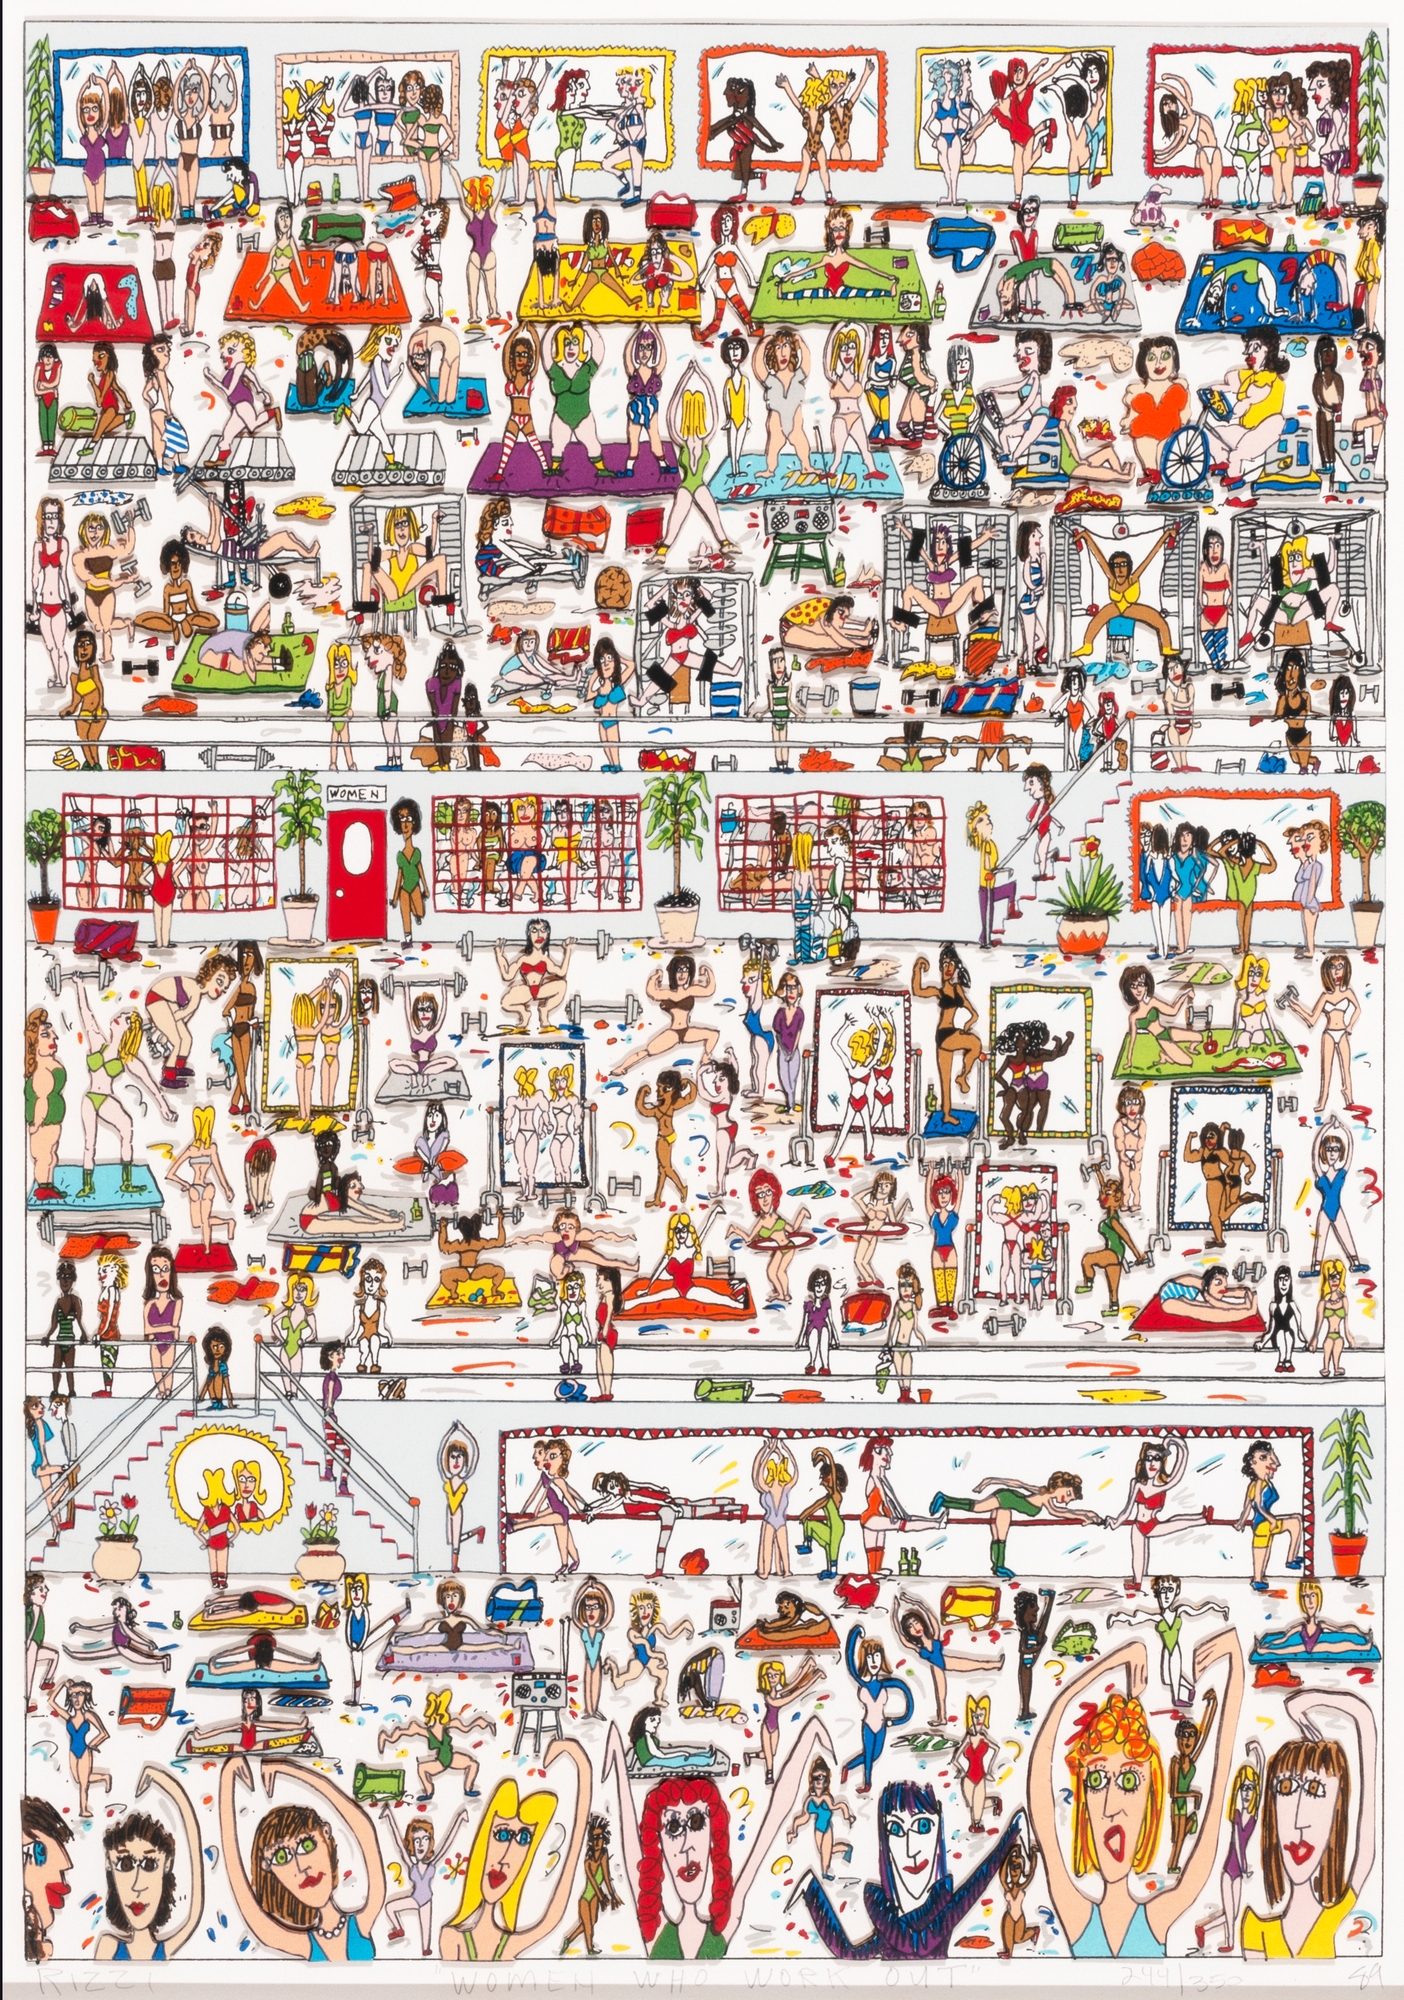 Women Who Work Out by James Rizzi, 1989